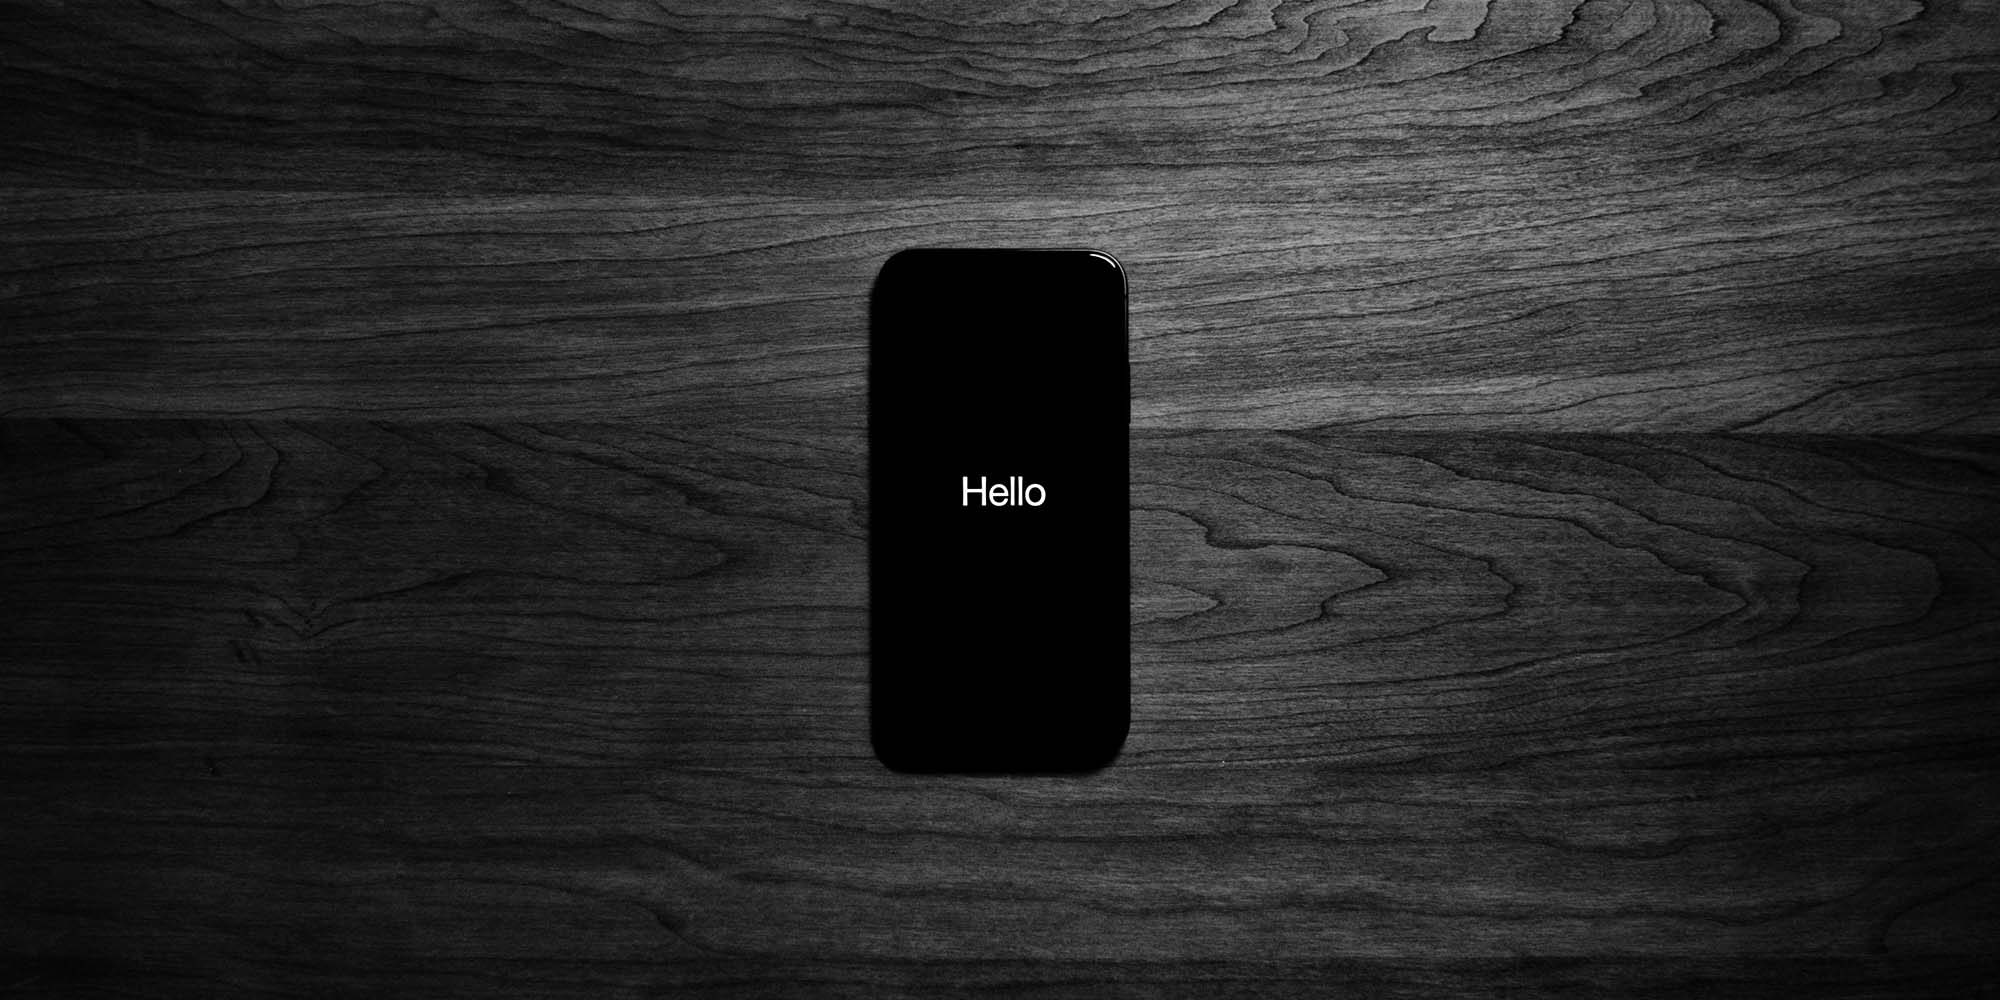 Cover Image for Hello World!